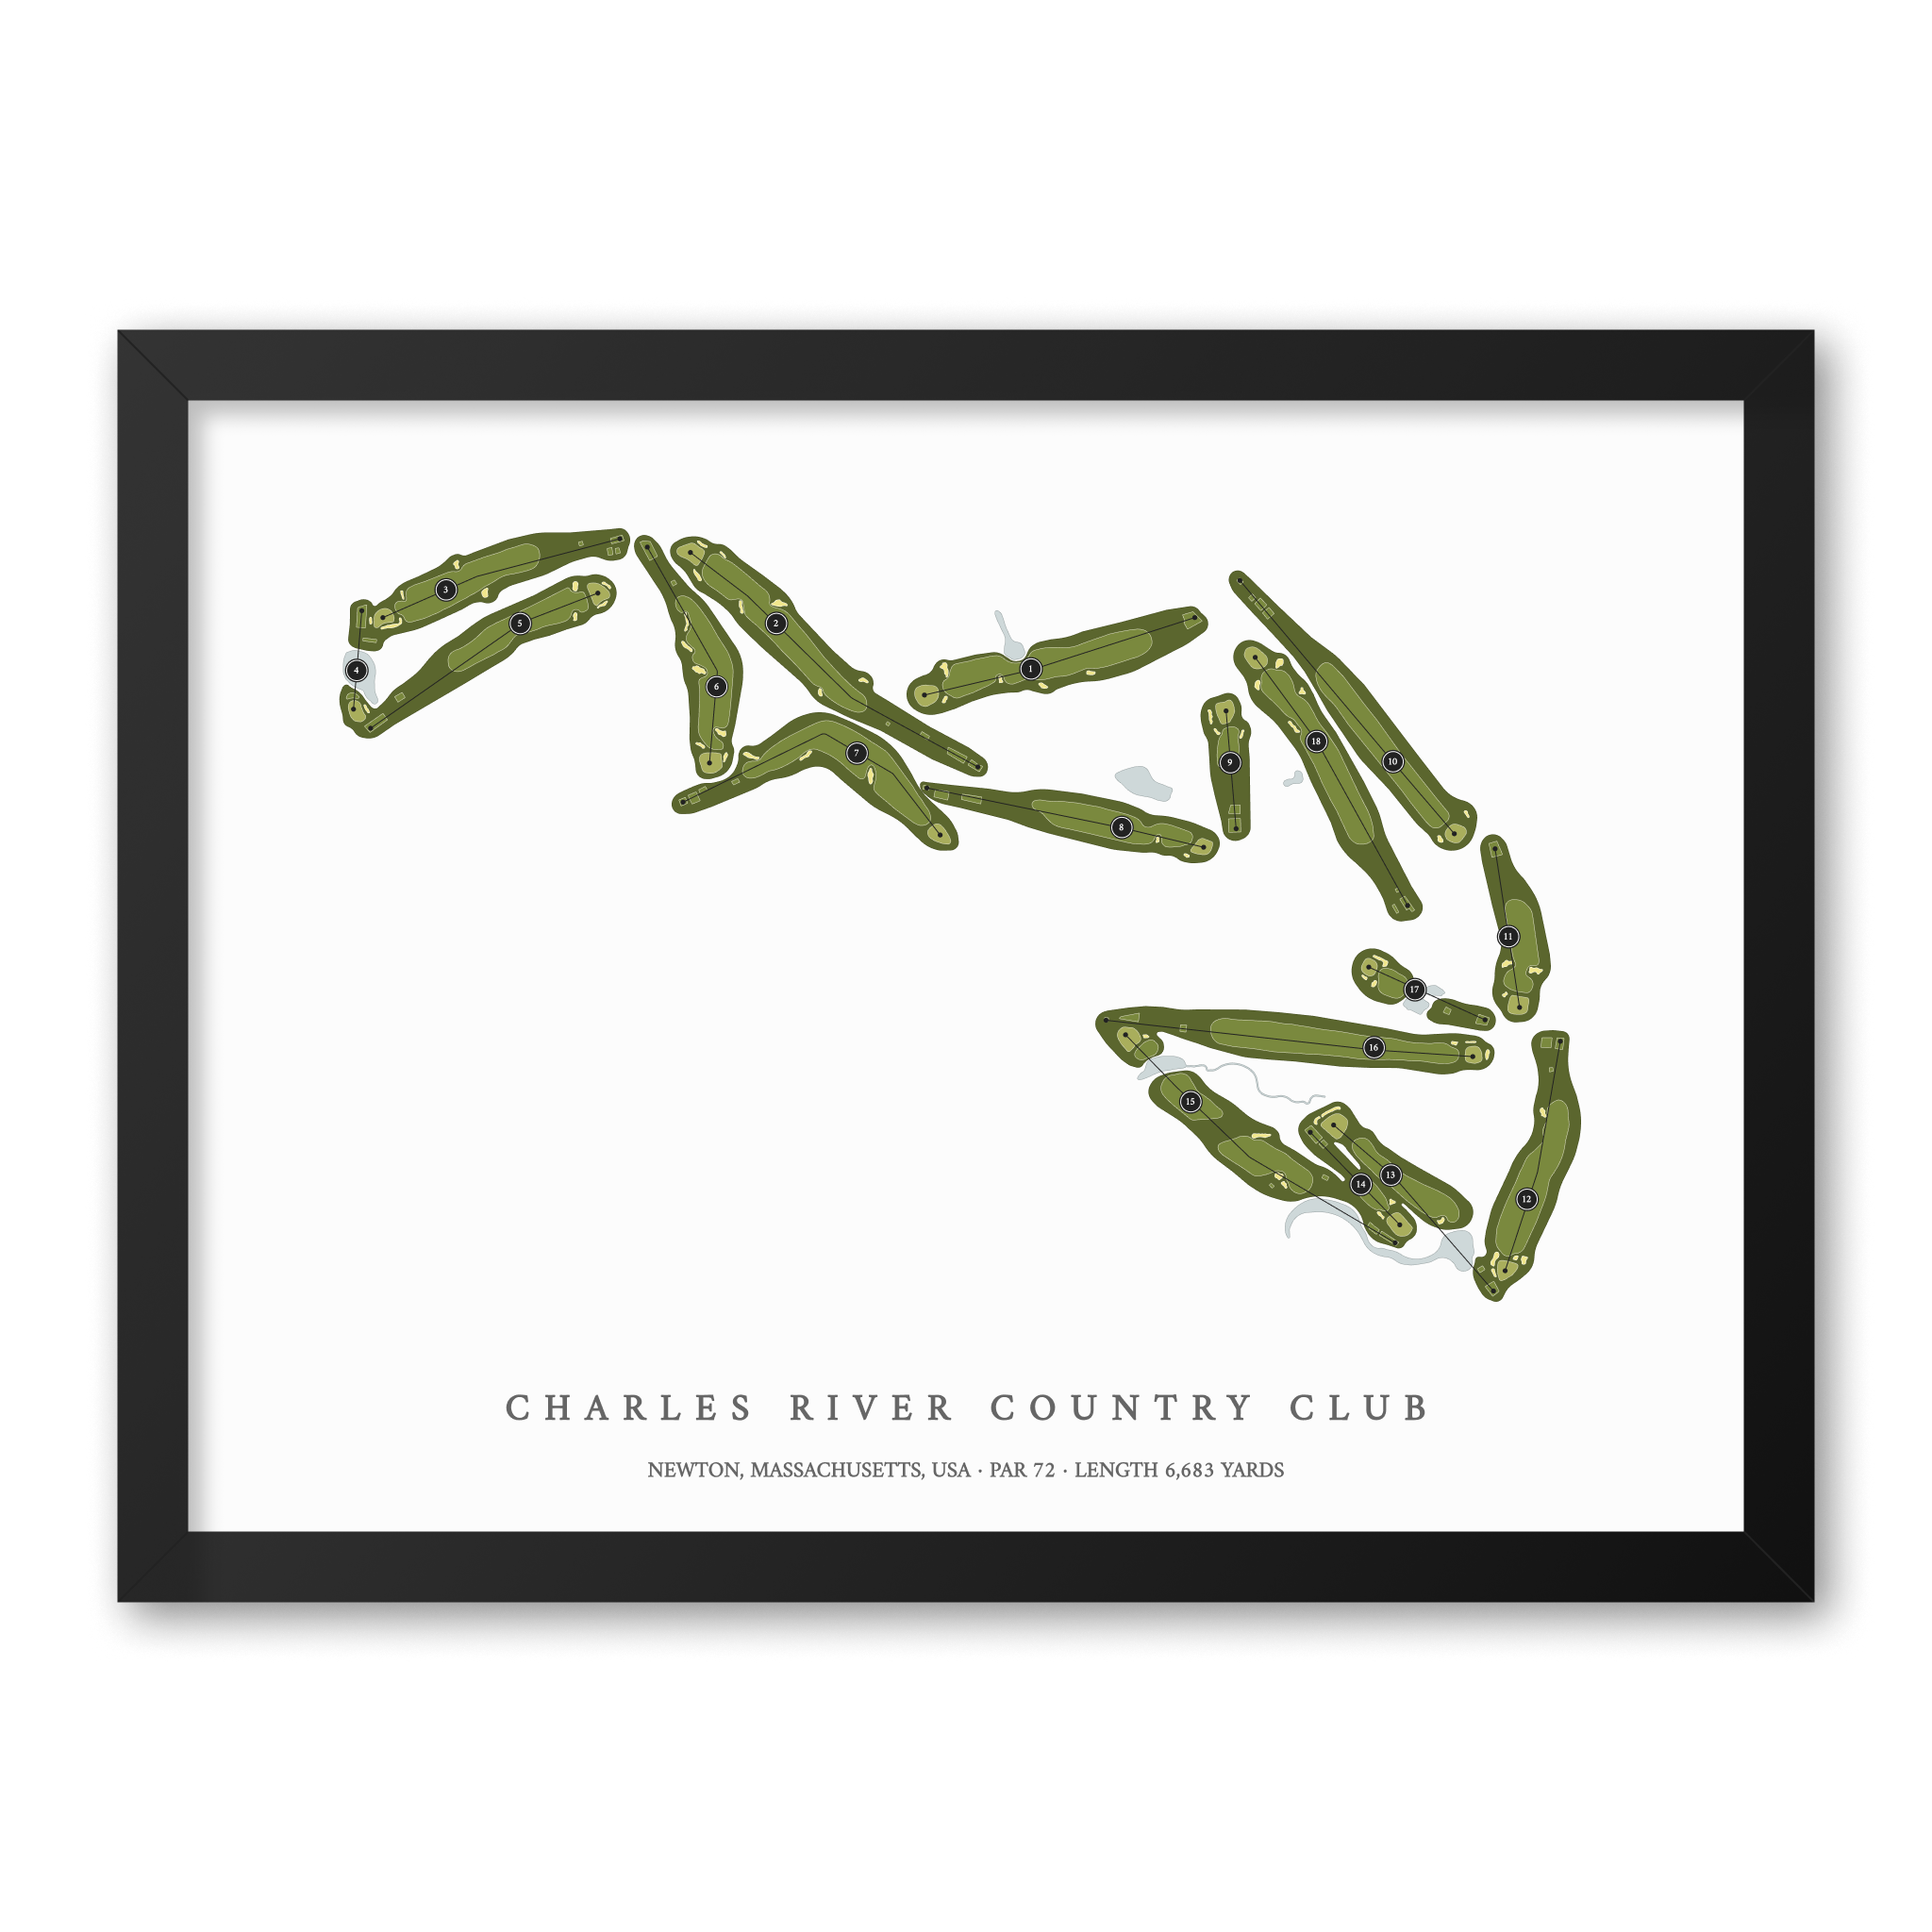 Charles River Country Club| Golf Course Print | Black Frame With Hole Numbers #hole numbers_yes